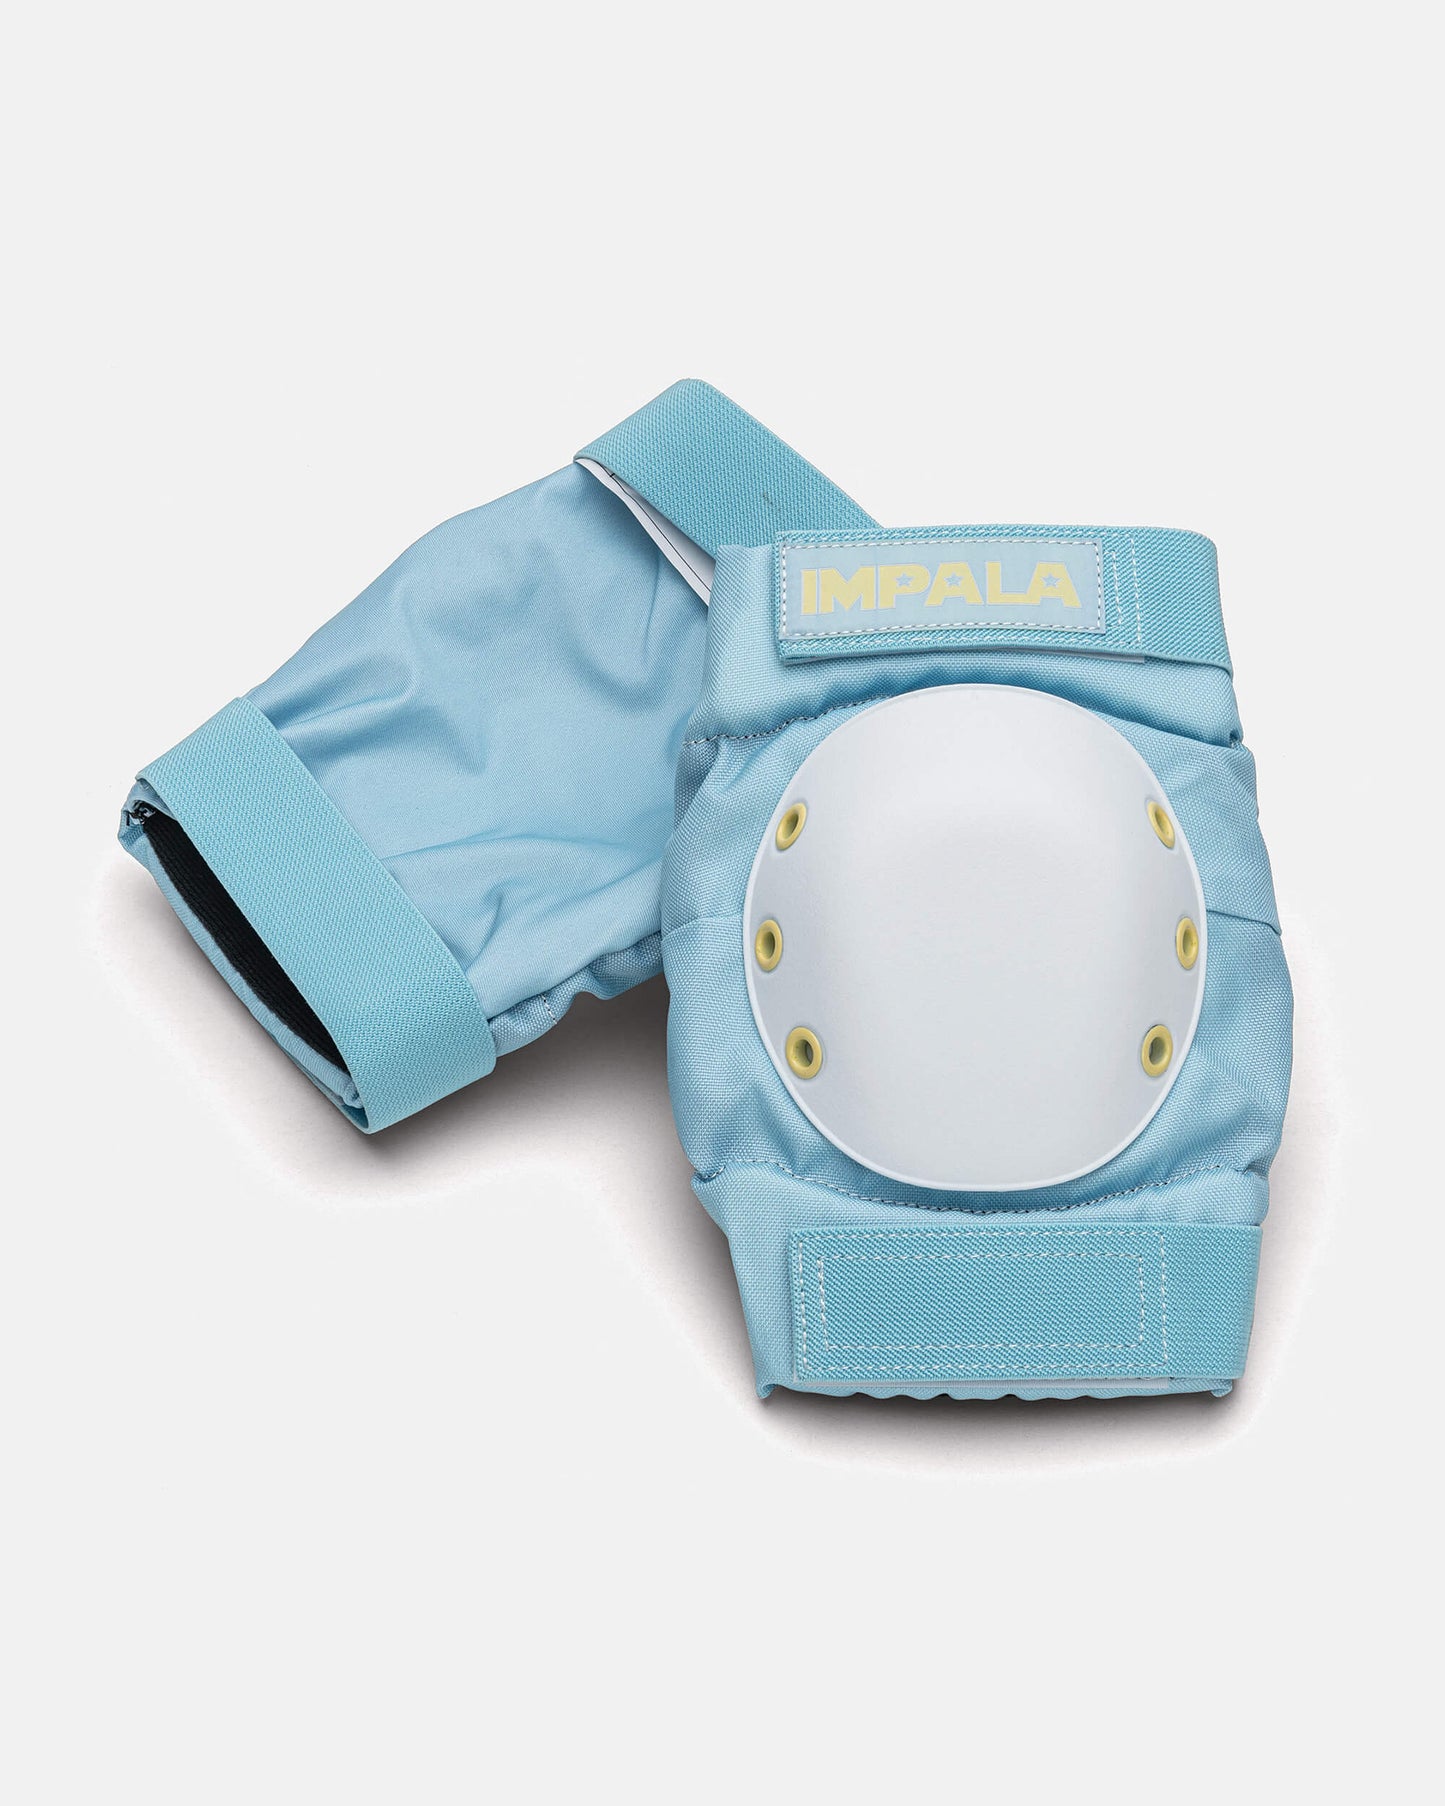 Impala Adult Protective Pack - Sky Blue/Yellow